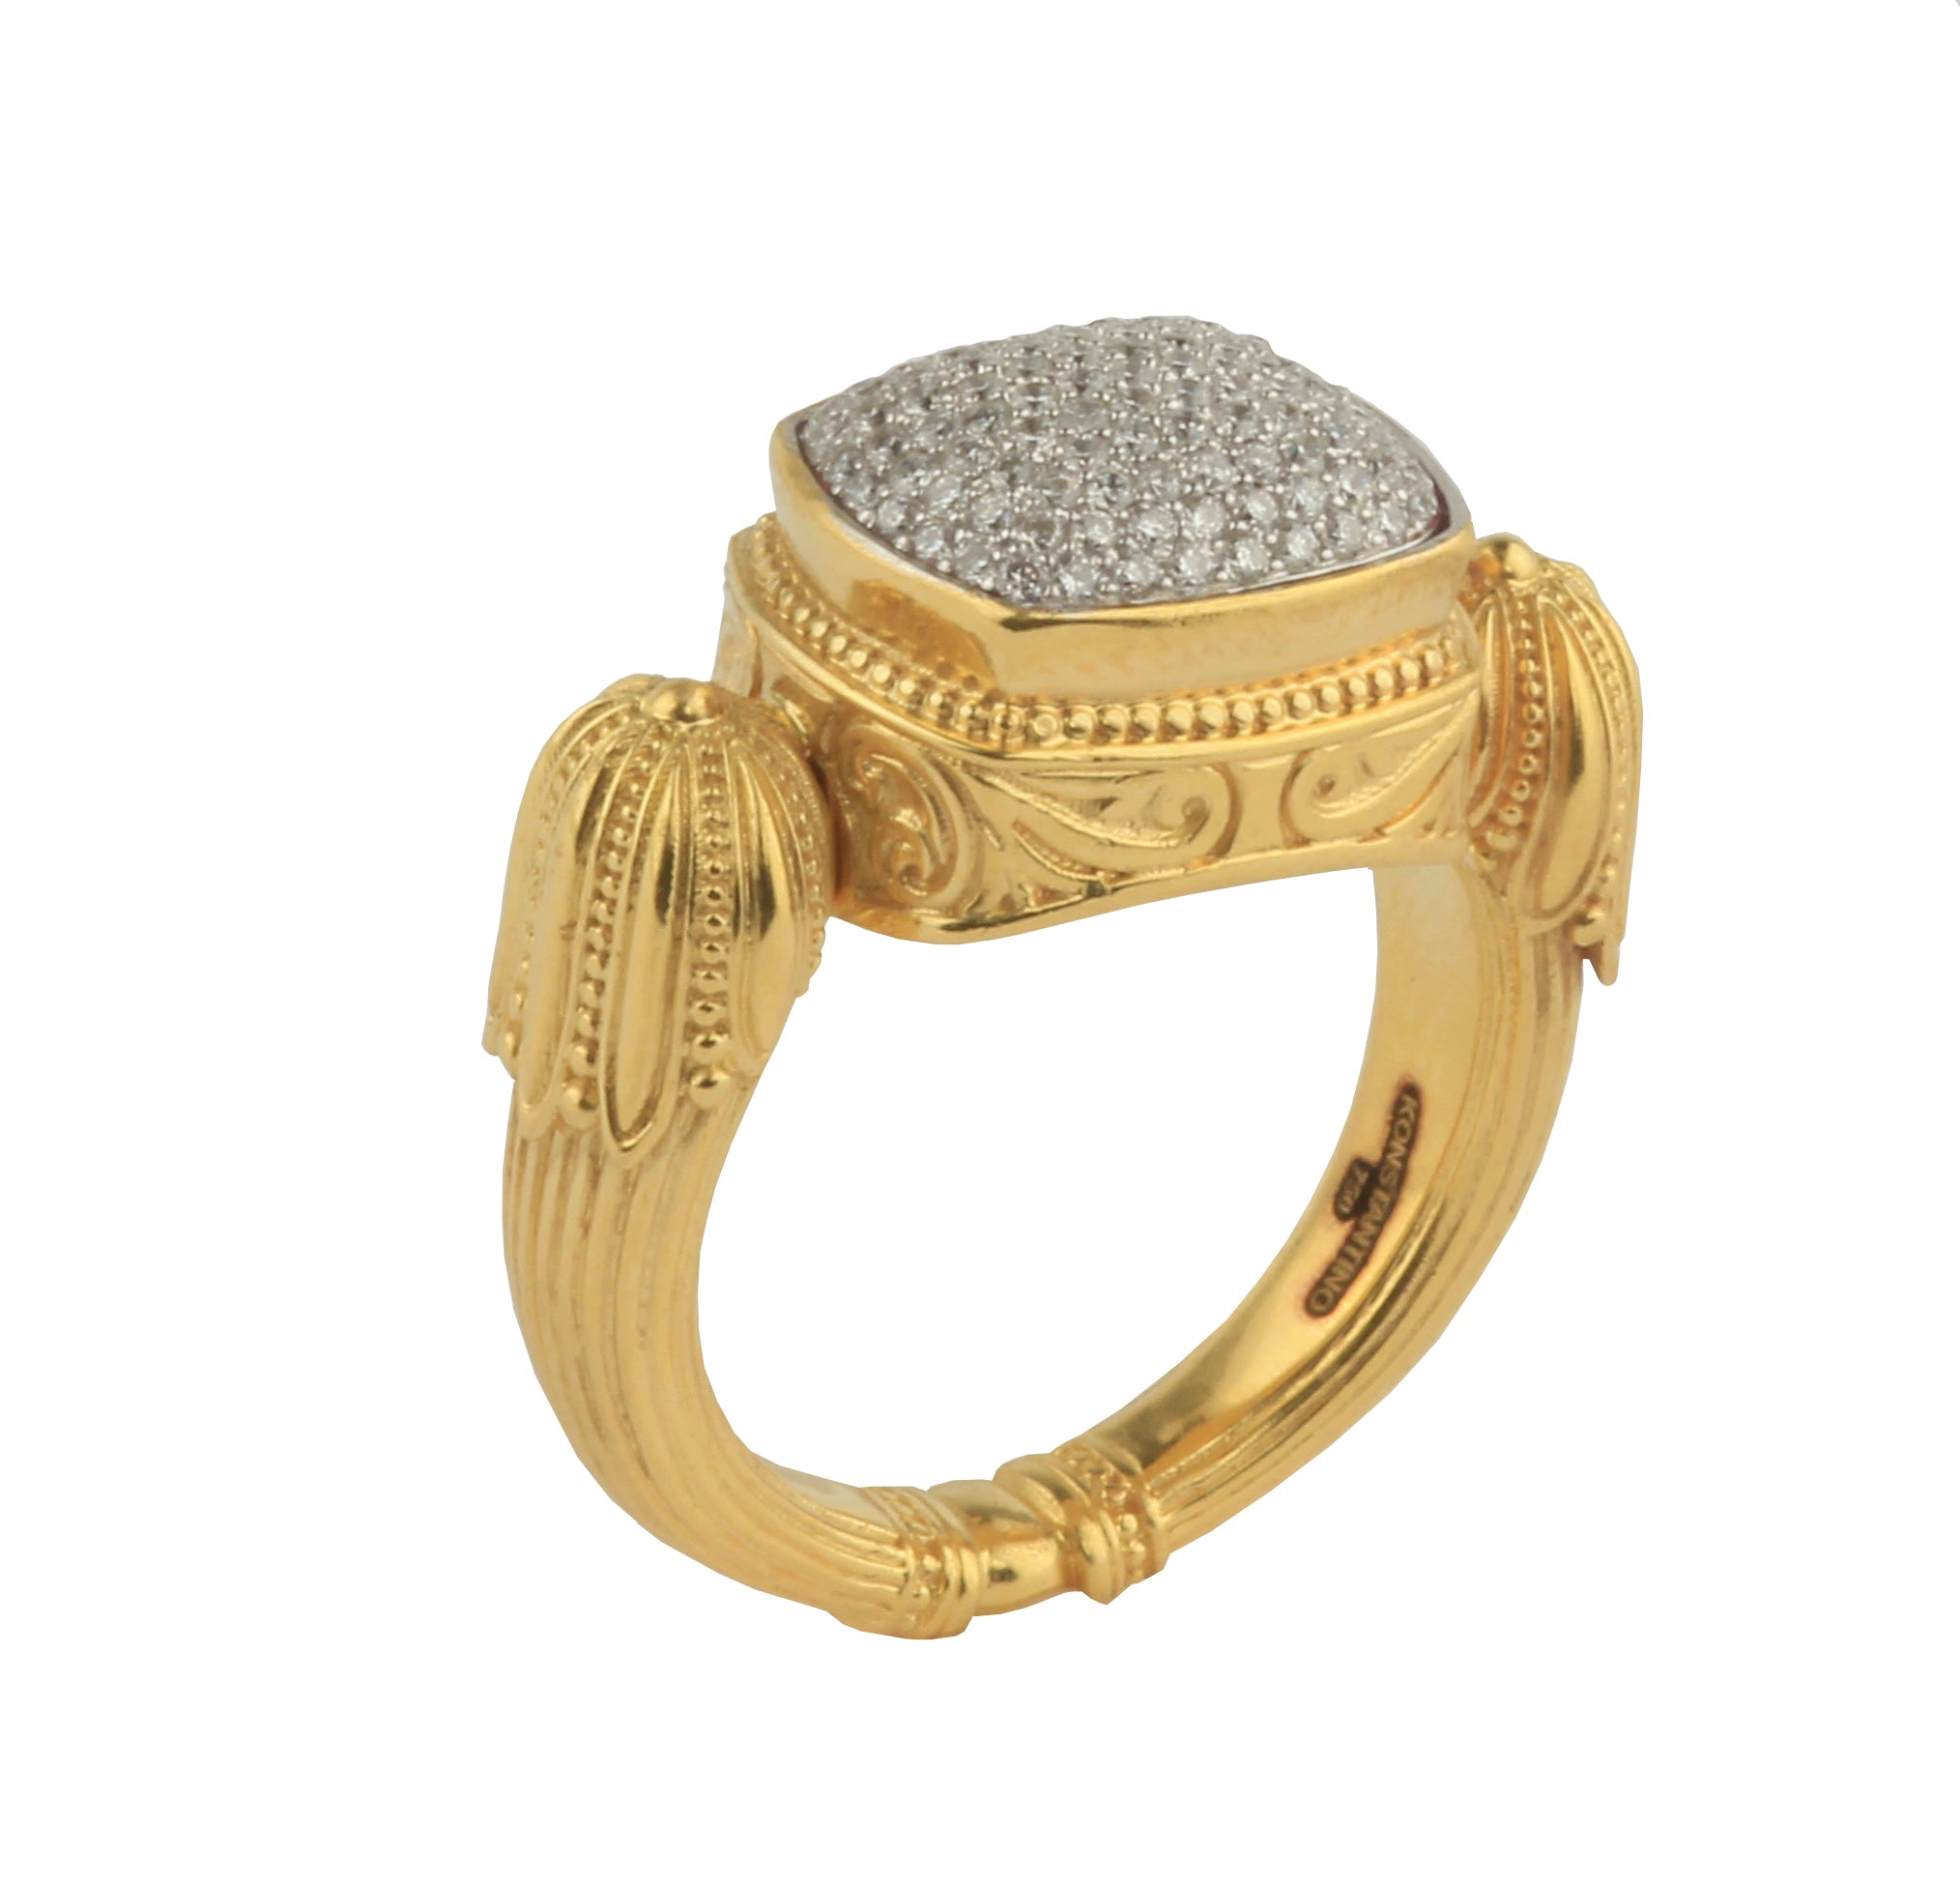 KONSTANTINO 18KT GOLD (7.03GR +/-)  PAVE (0.48CT +/-) RING FROM THE FLAMENCO GOLD  COLLECTION